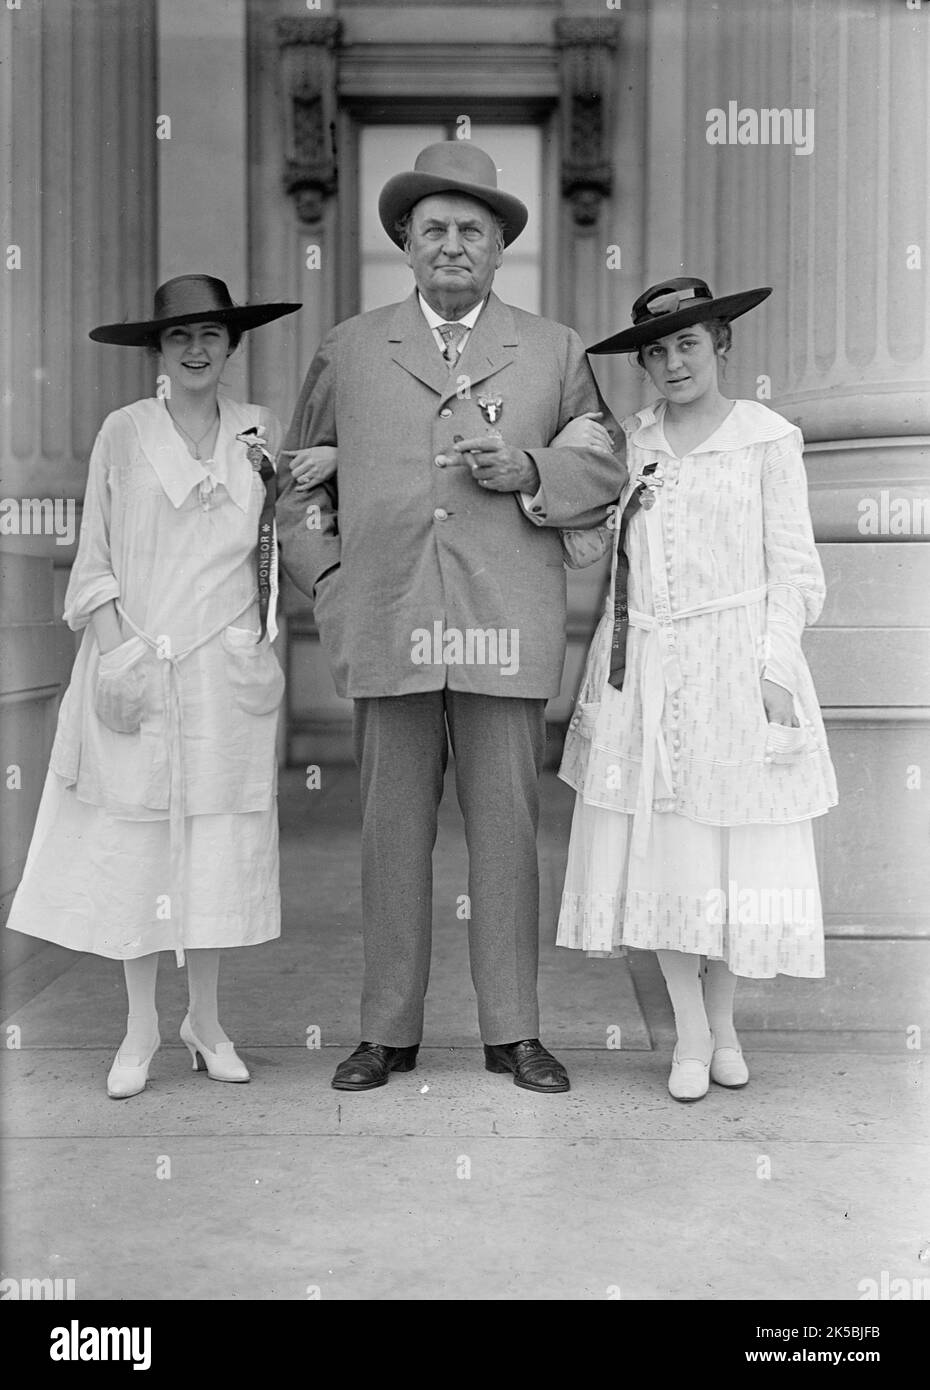 John Hollis Bankhead, Rep. from Alabama, At Confederate Reunion, Washington D.C. with Grand-Daughters, Tallulah, Left, And Eugenia, Right, 1917. Representative 1887-1907; Senator, 1907-1920. Tallulah Bankhead, here aged 15, went on to become a star of stage and screen. Stock Photo